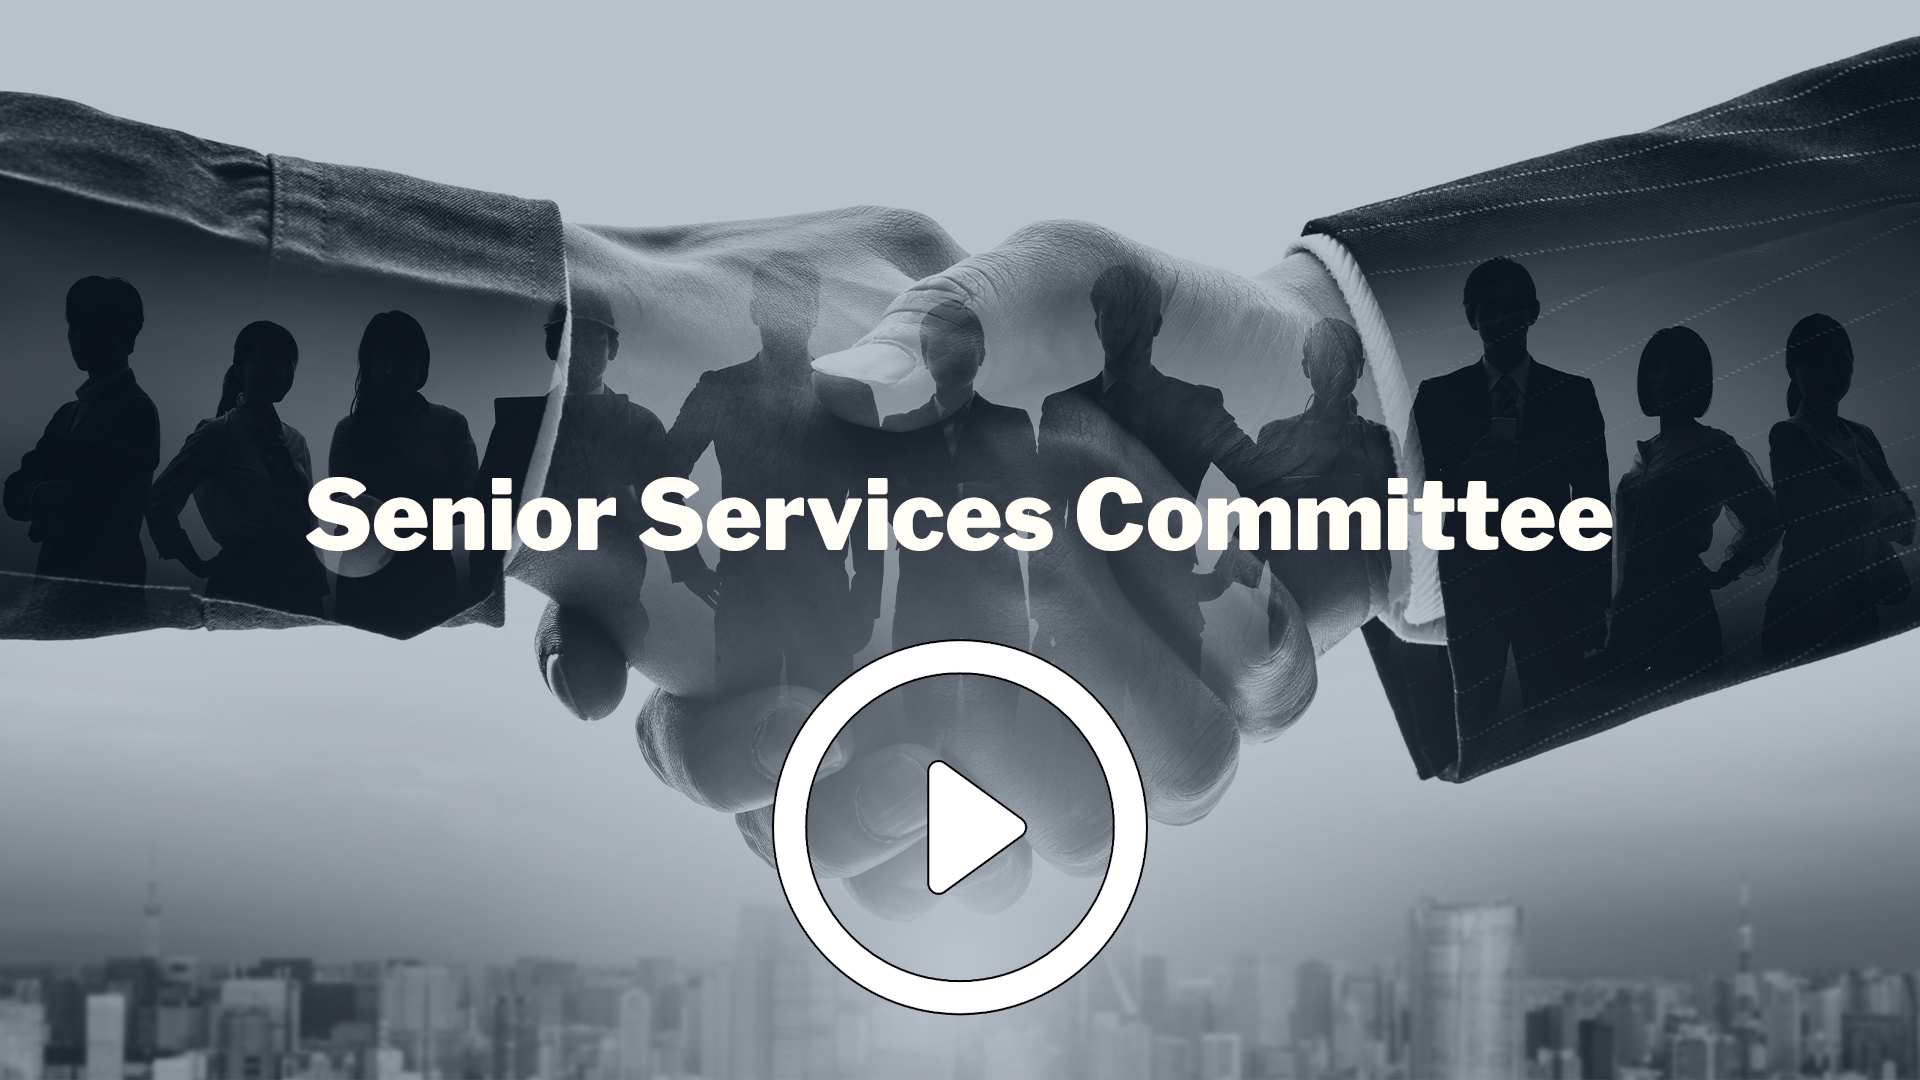 Senior Services Committee Overview Video